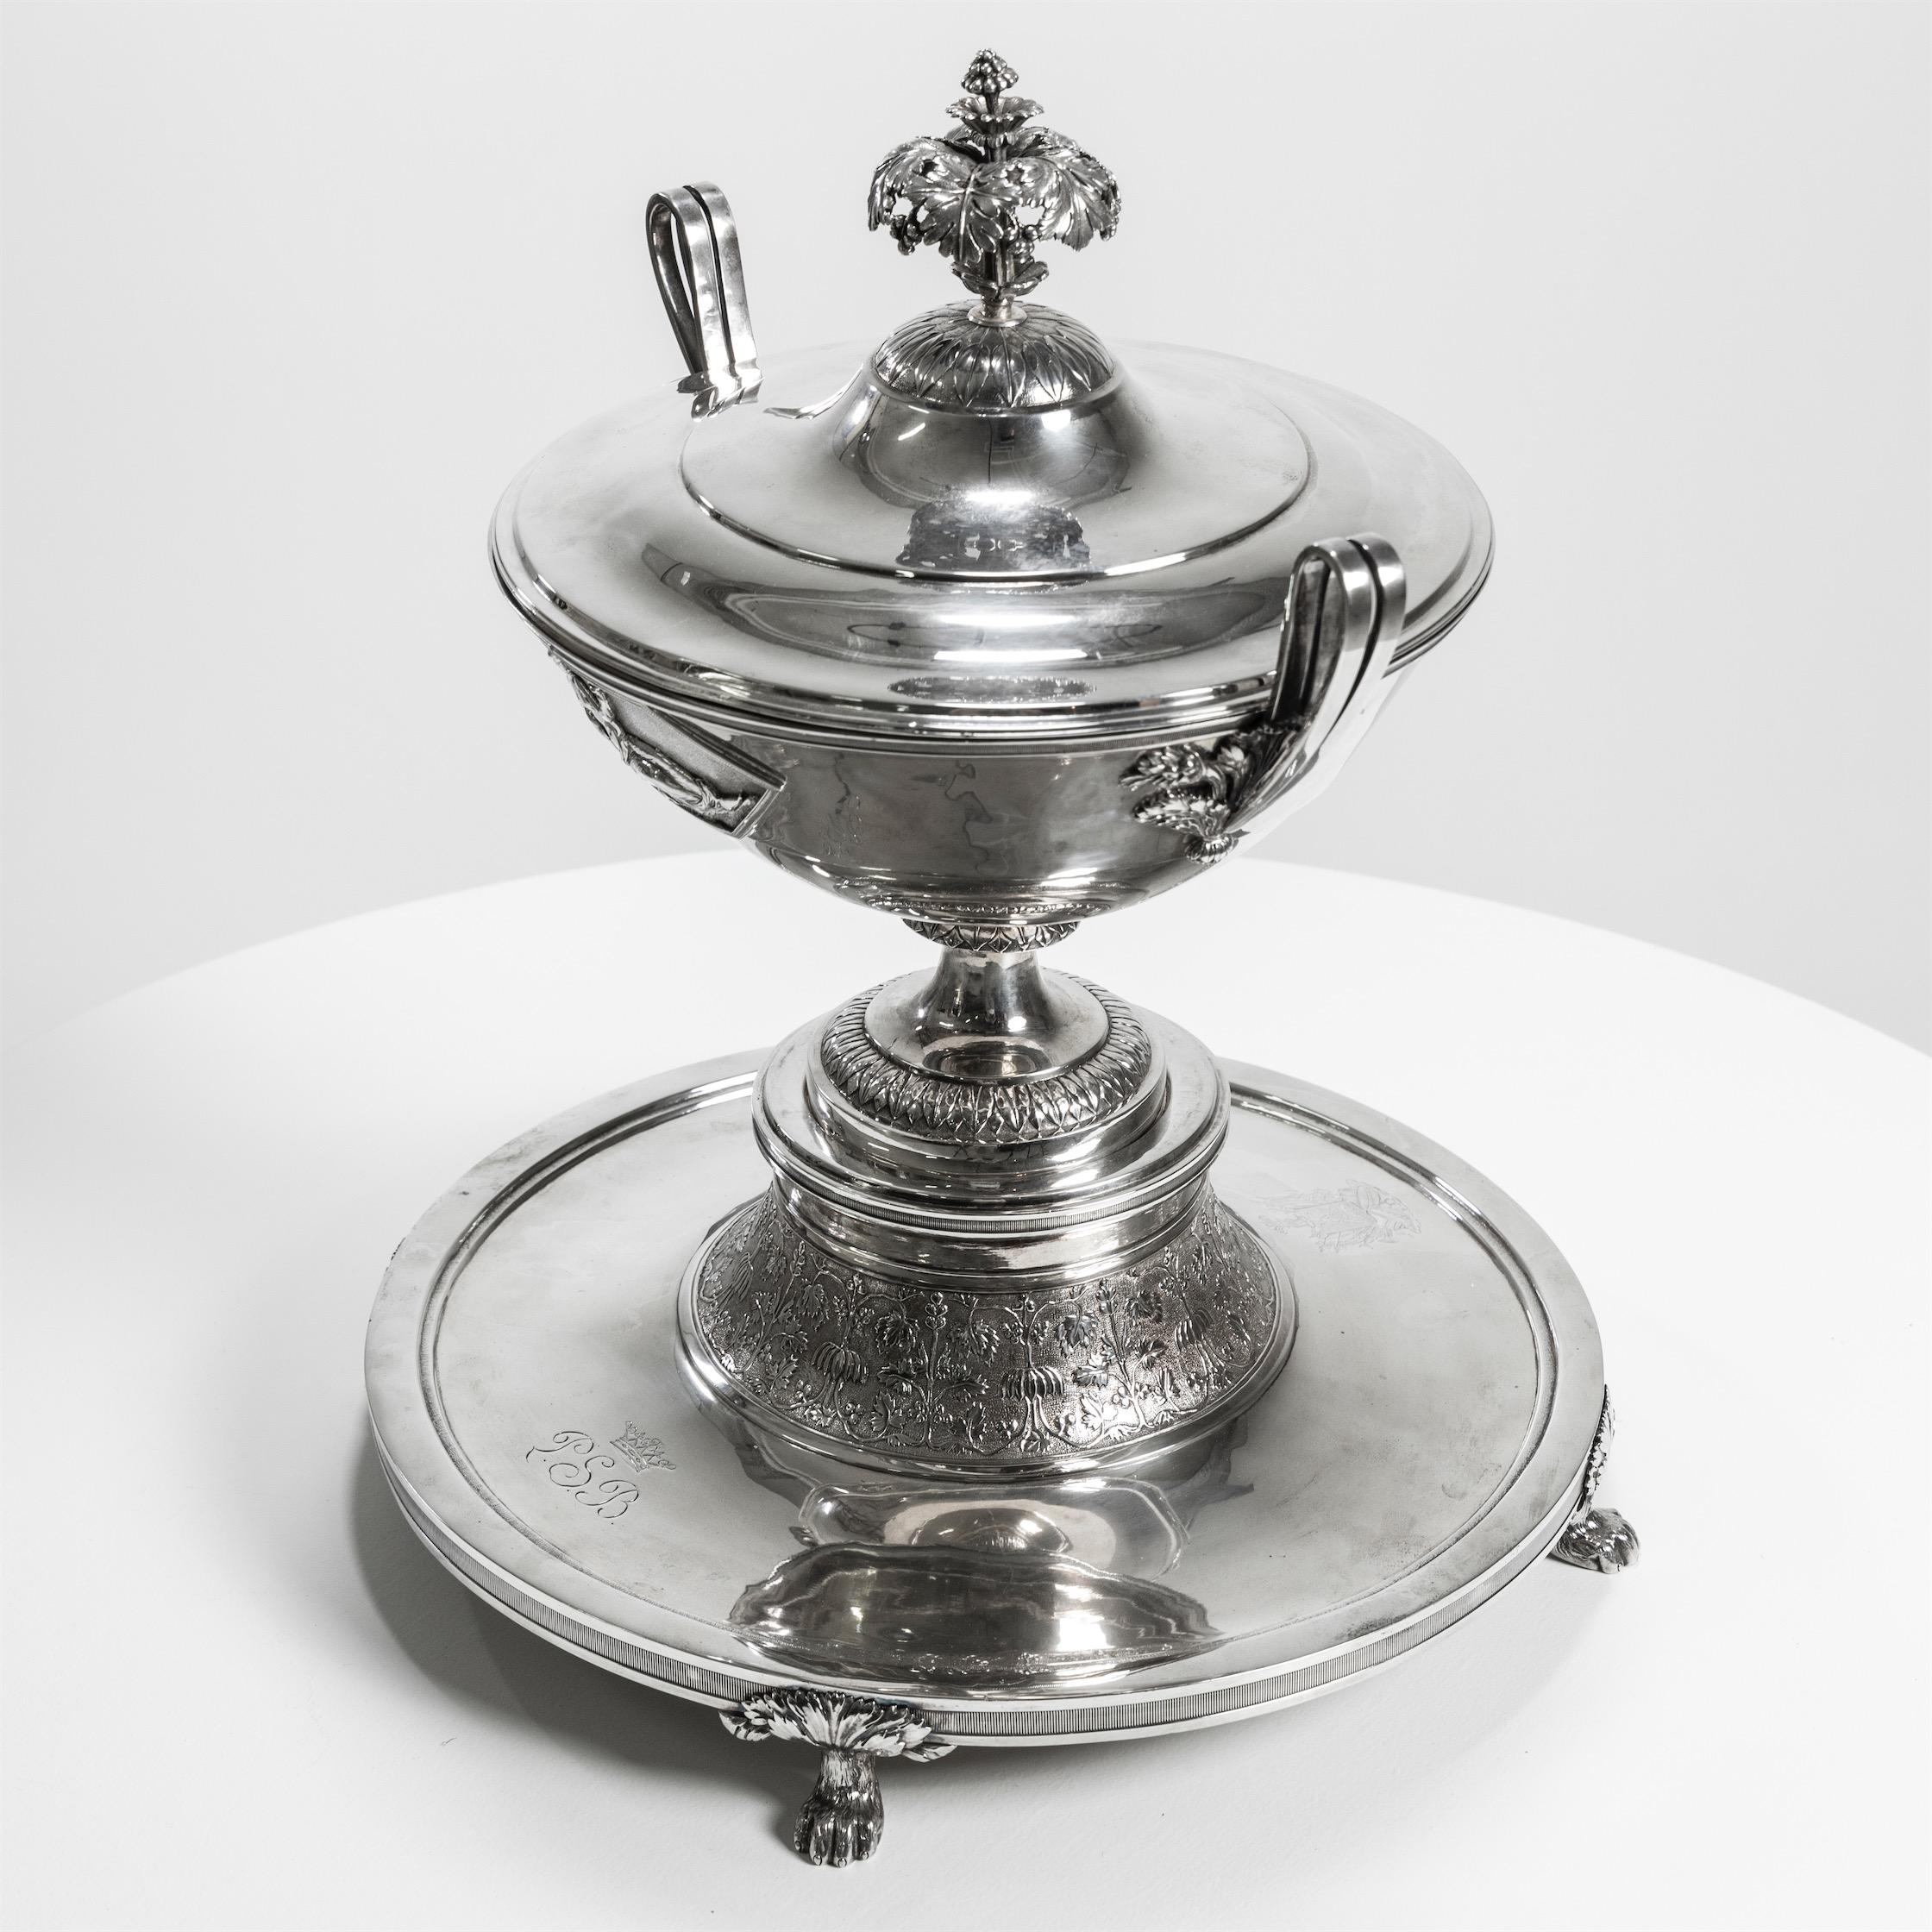 Pair of silver lidded tureens with reclining female figures on the walls and the herb 